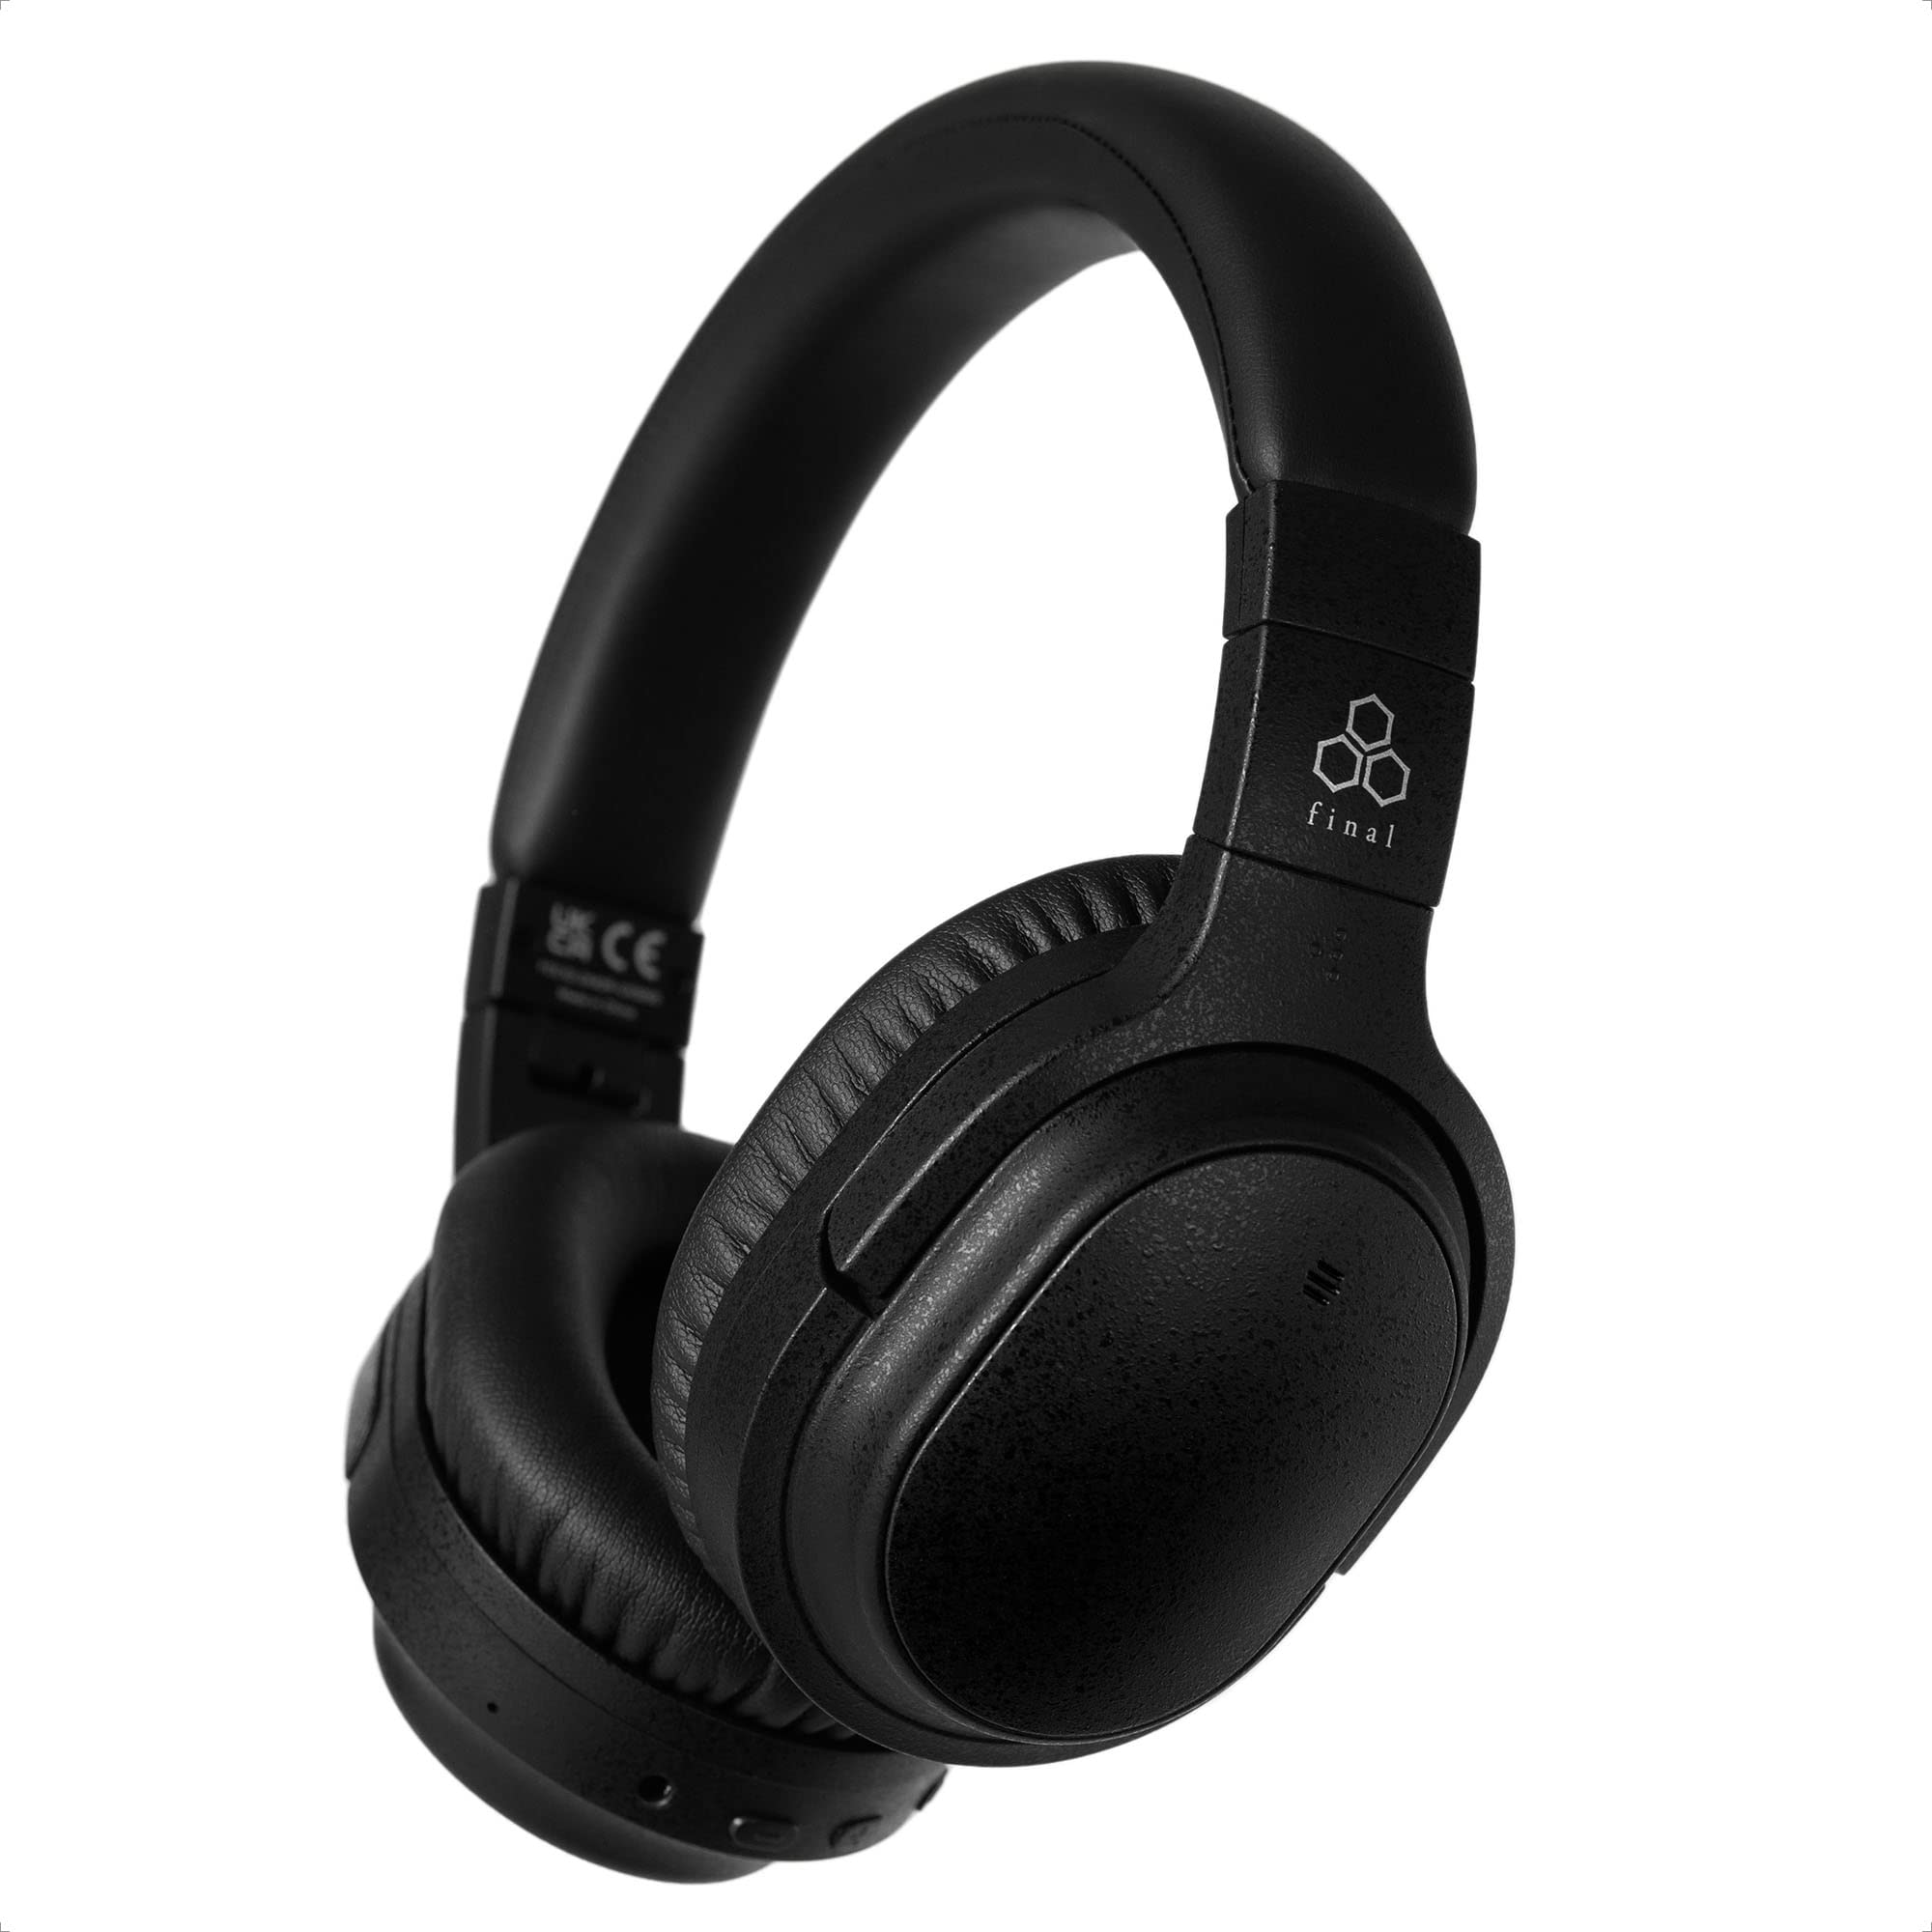 Final UX3000 Wireless Overhead Headphones with Active Noise Cancelling